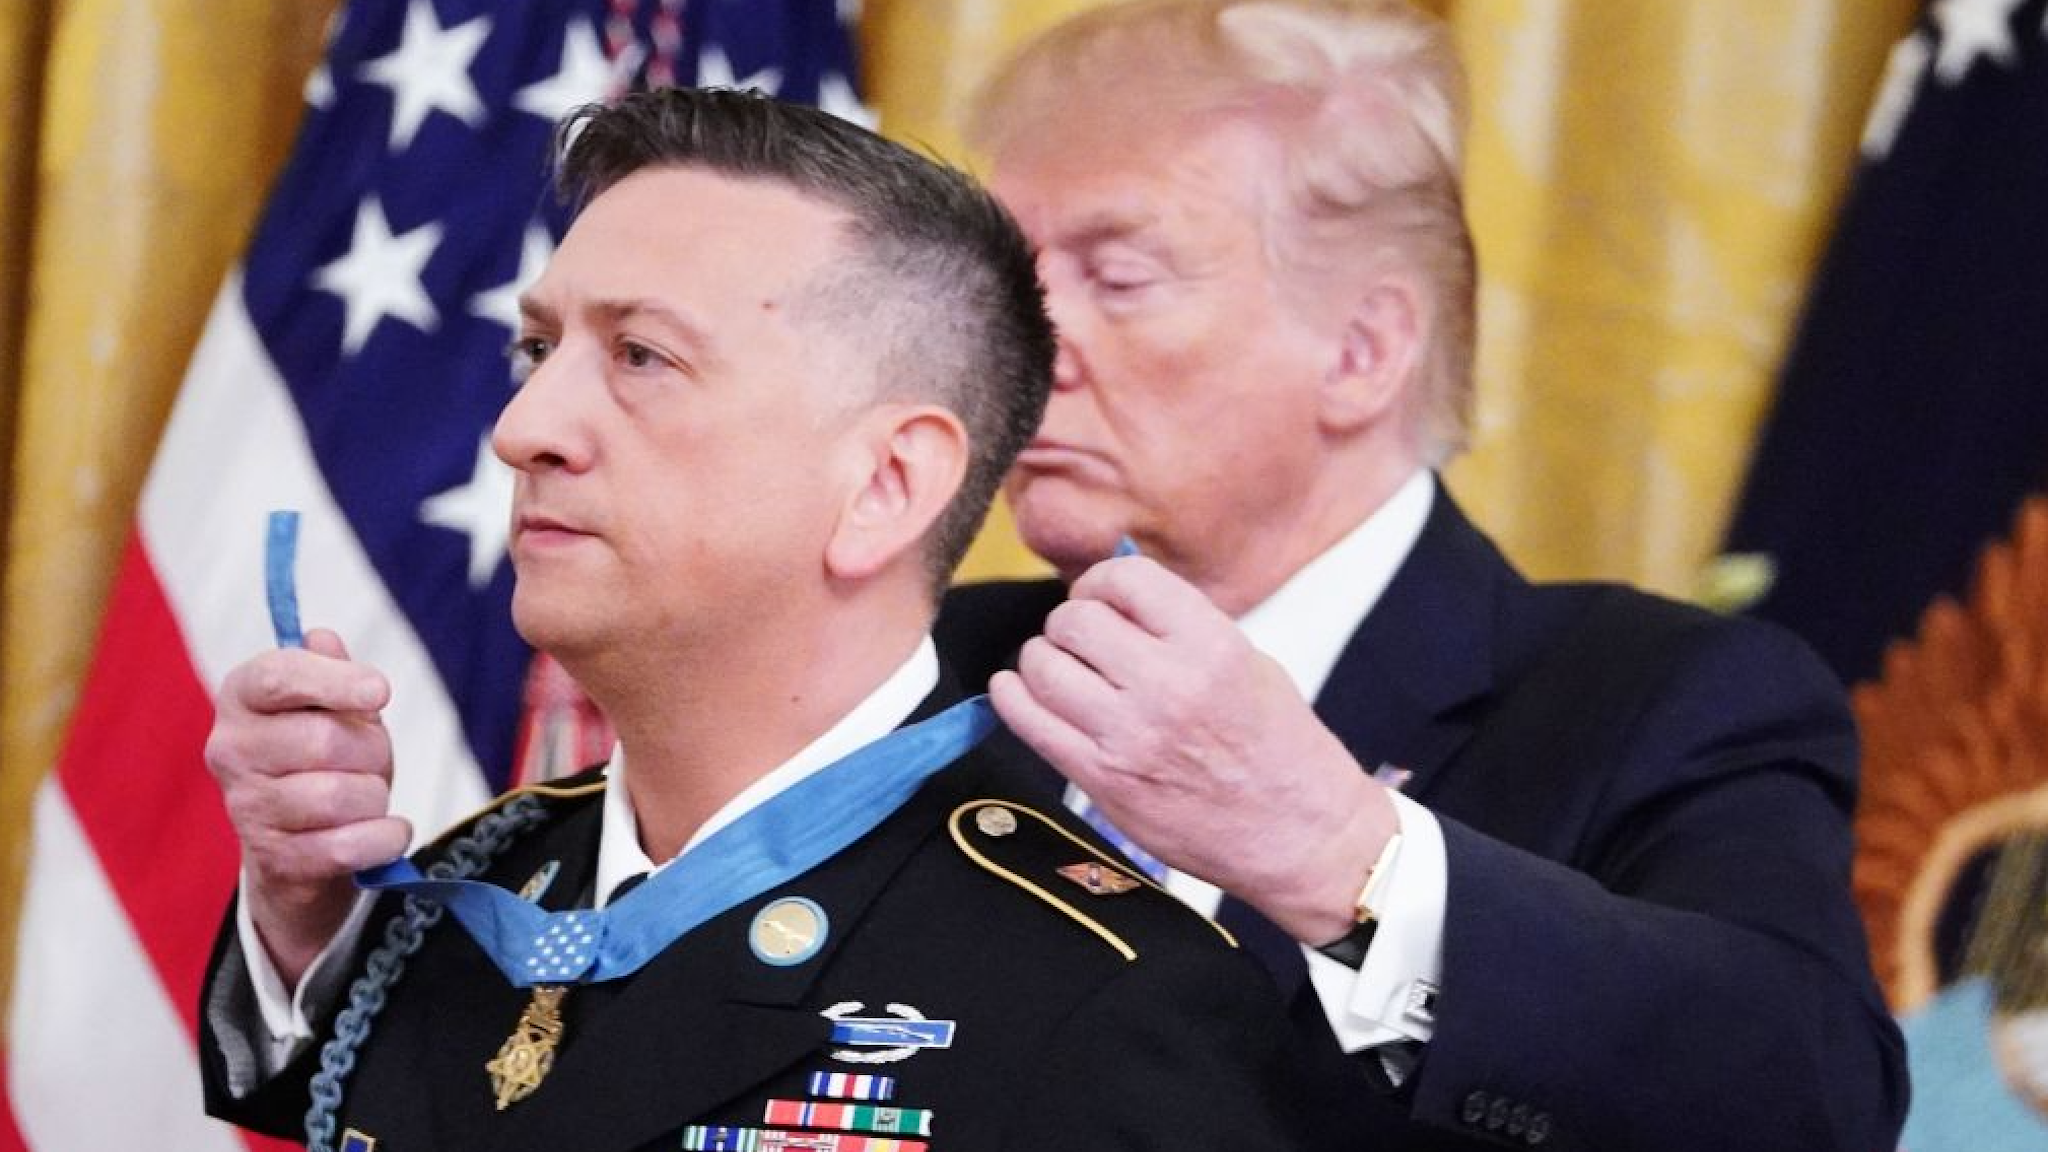 US President Donald Trump presents the Medal of Honor to David Bellavia in the East Room of the White House in Washington, DC on June 25, 2019.